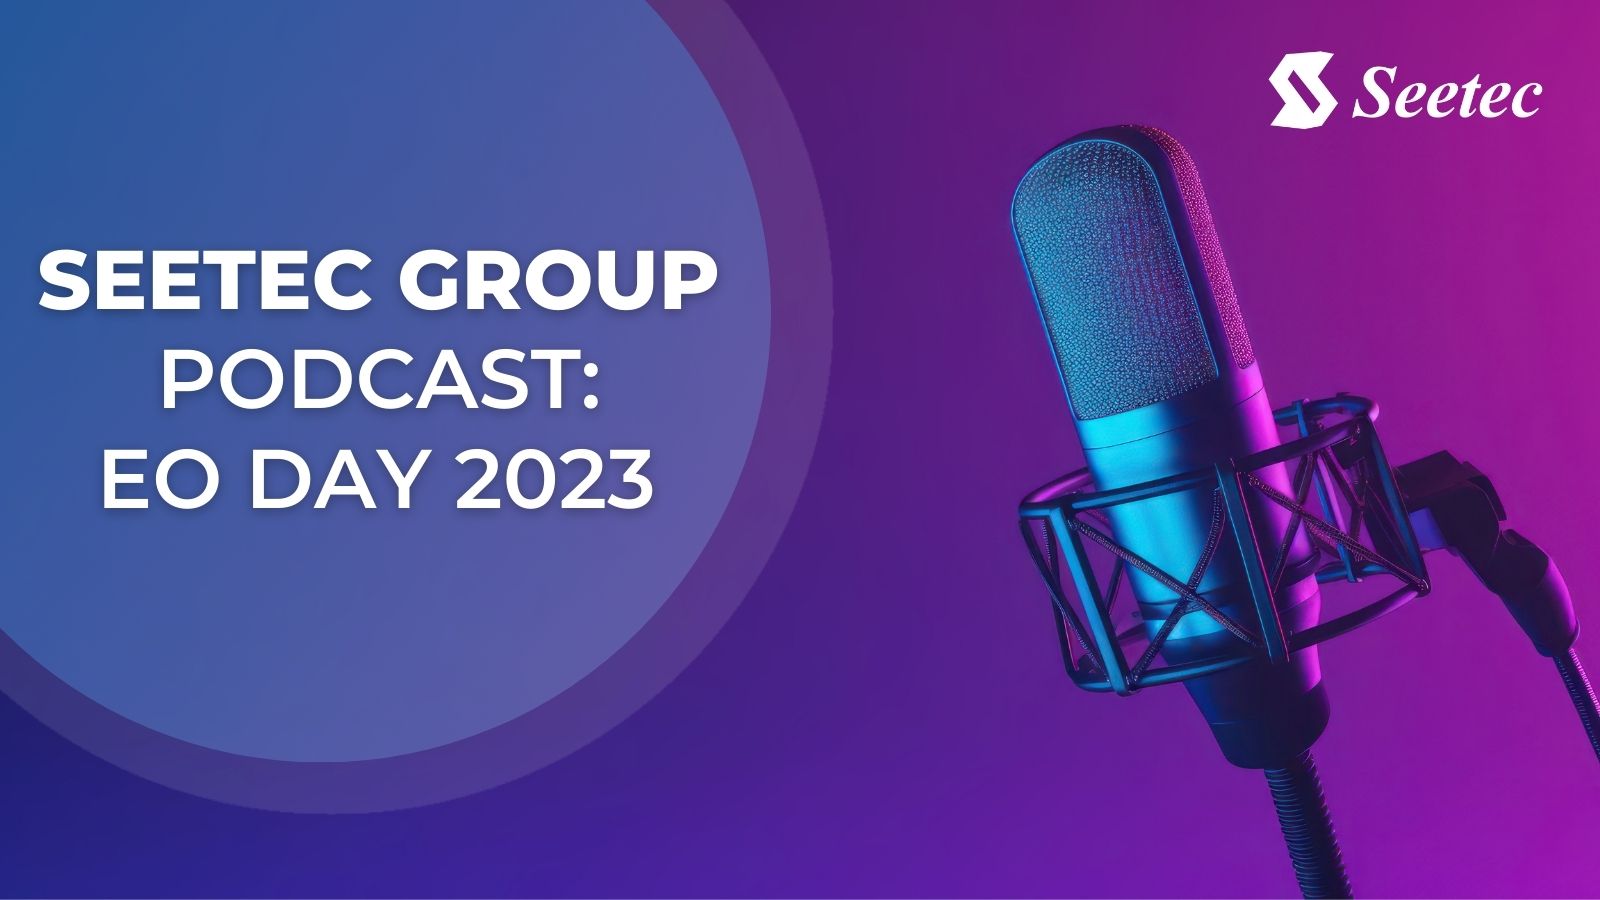 Seetec Group Podcast: EO Day 2023